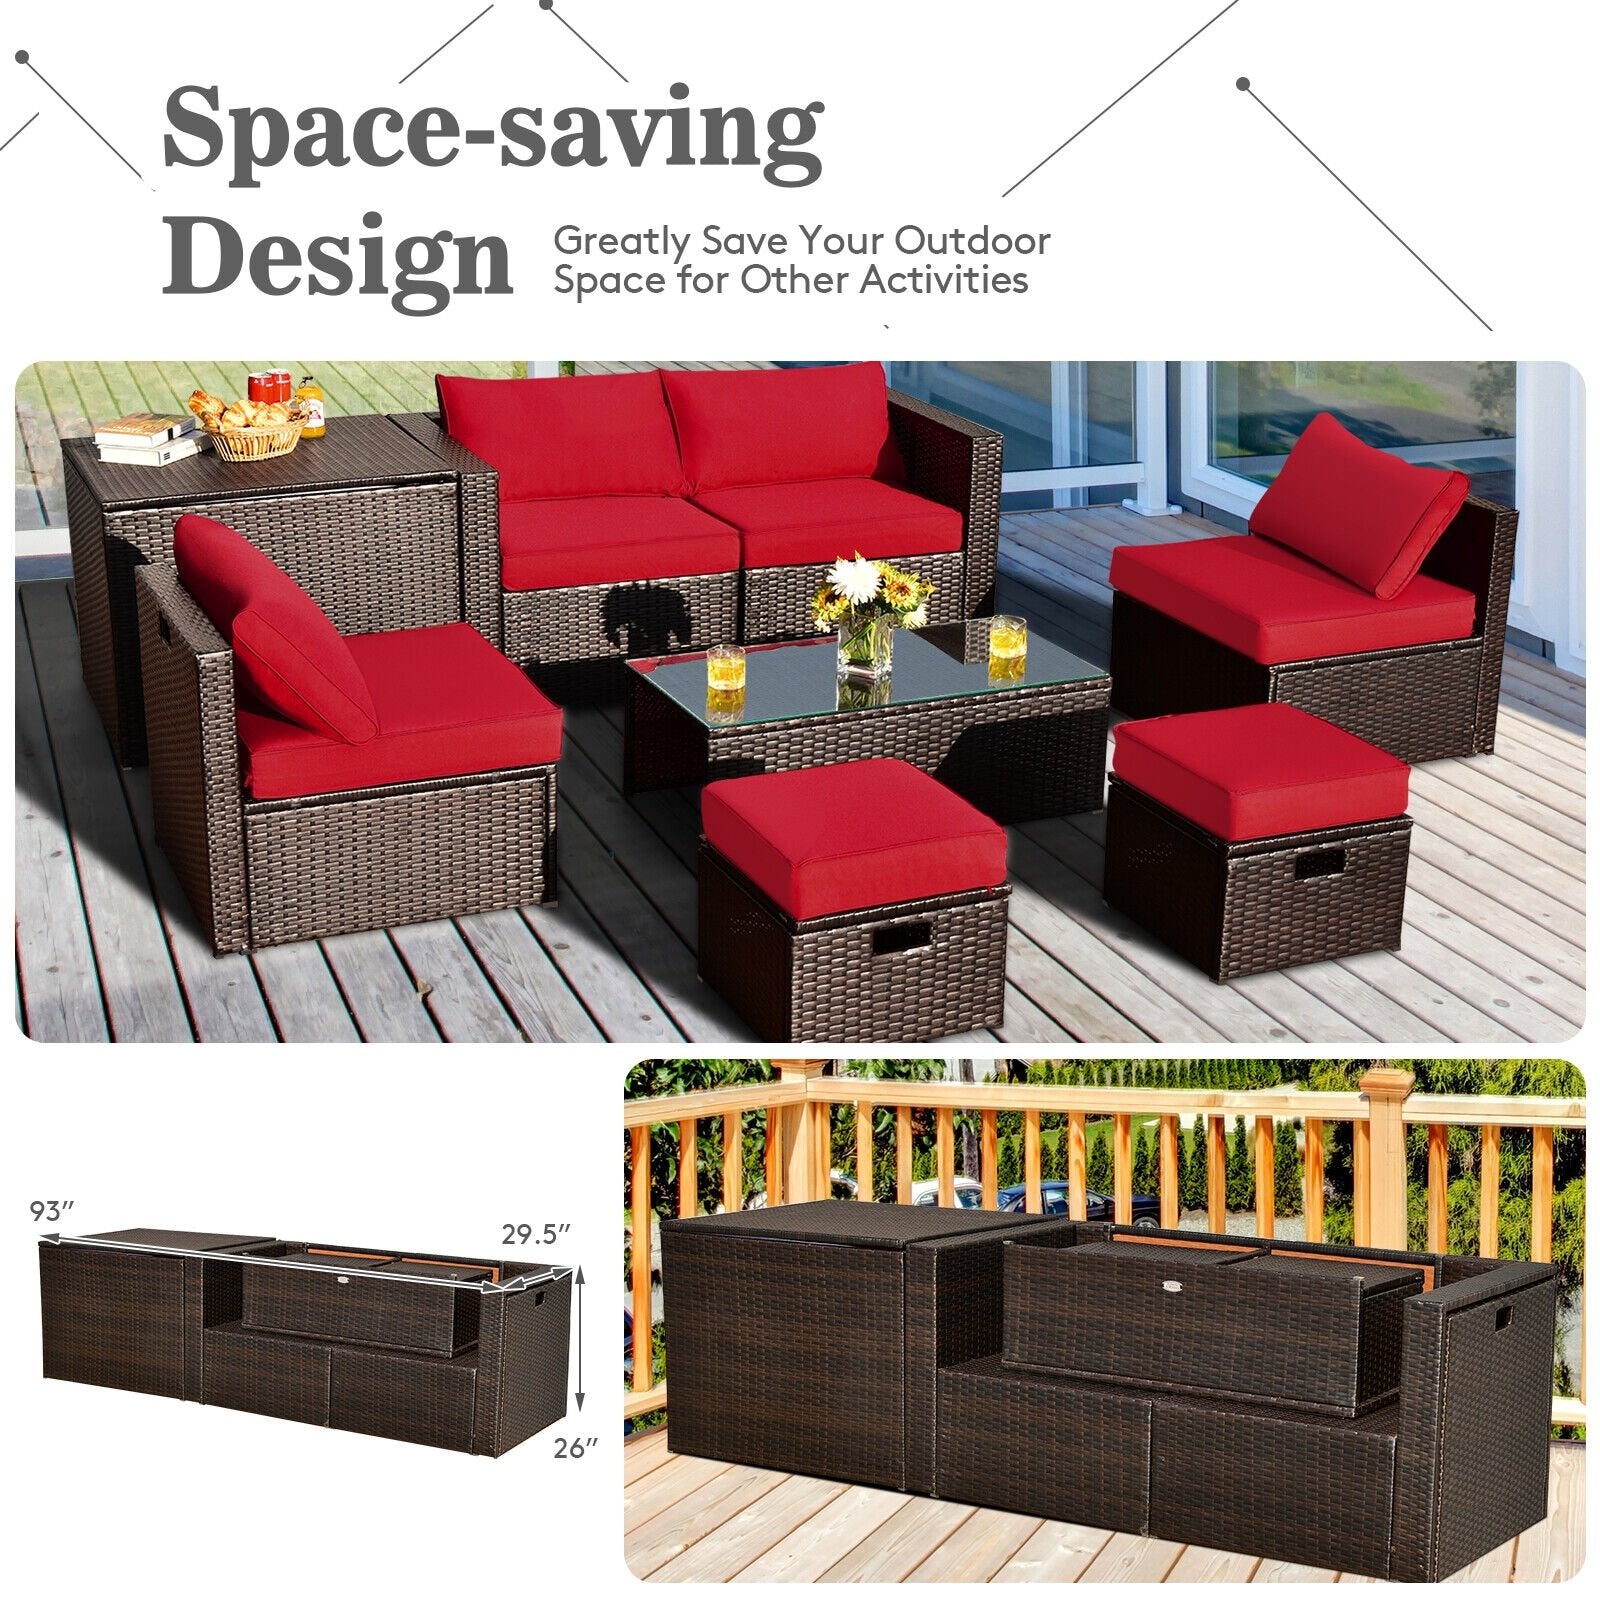 8 Pieces Patio Space-Saving Rattan Furniture Set with Storage Box and Waterproof Cover, Red - Gallery Canada